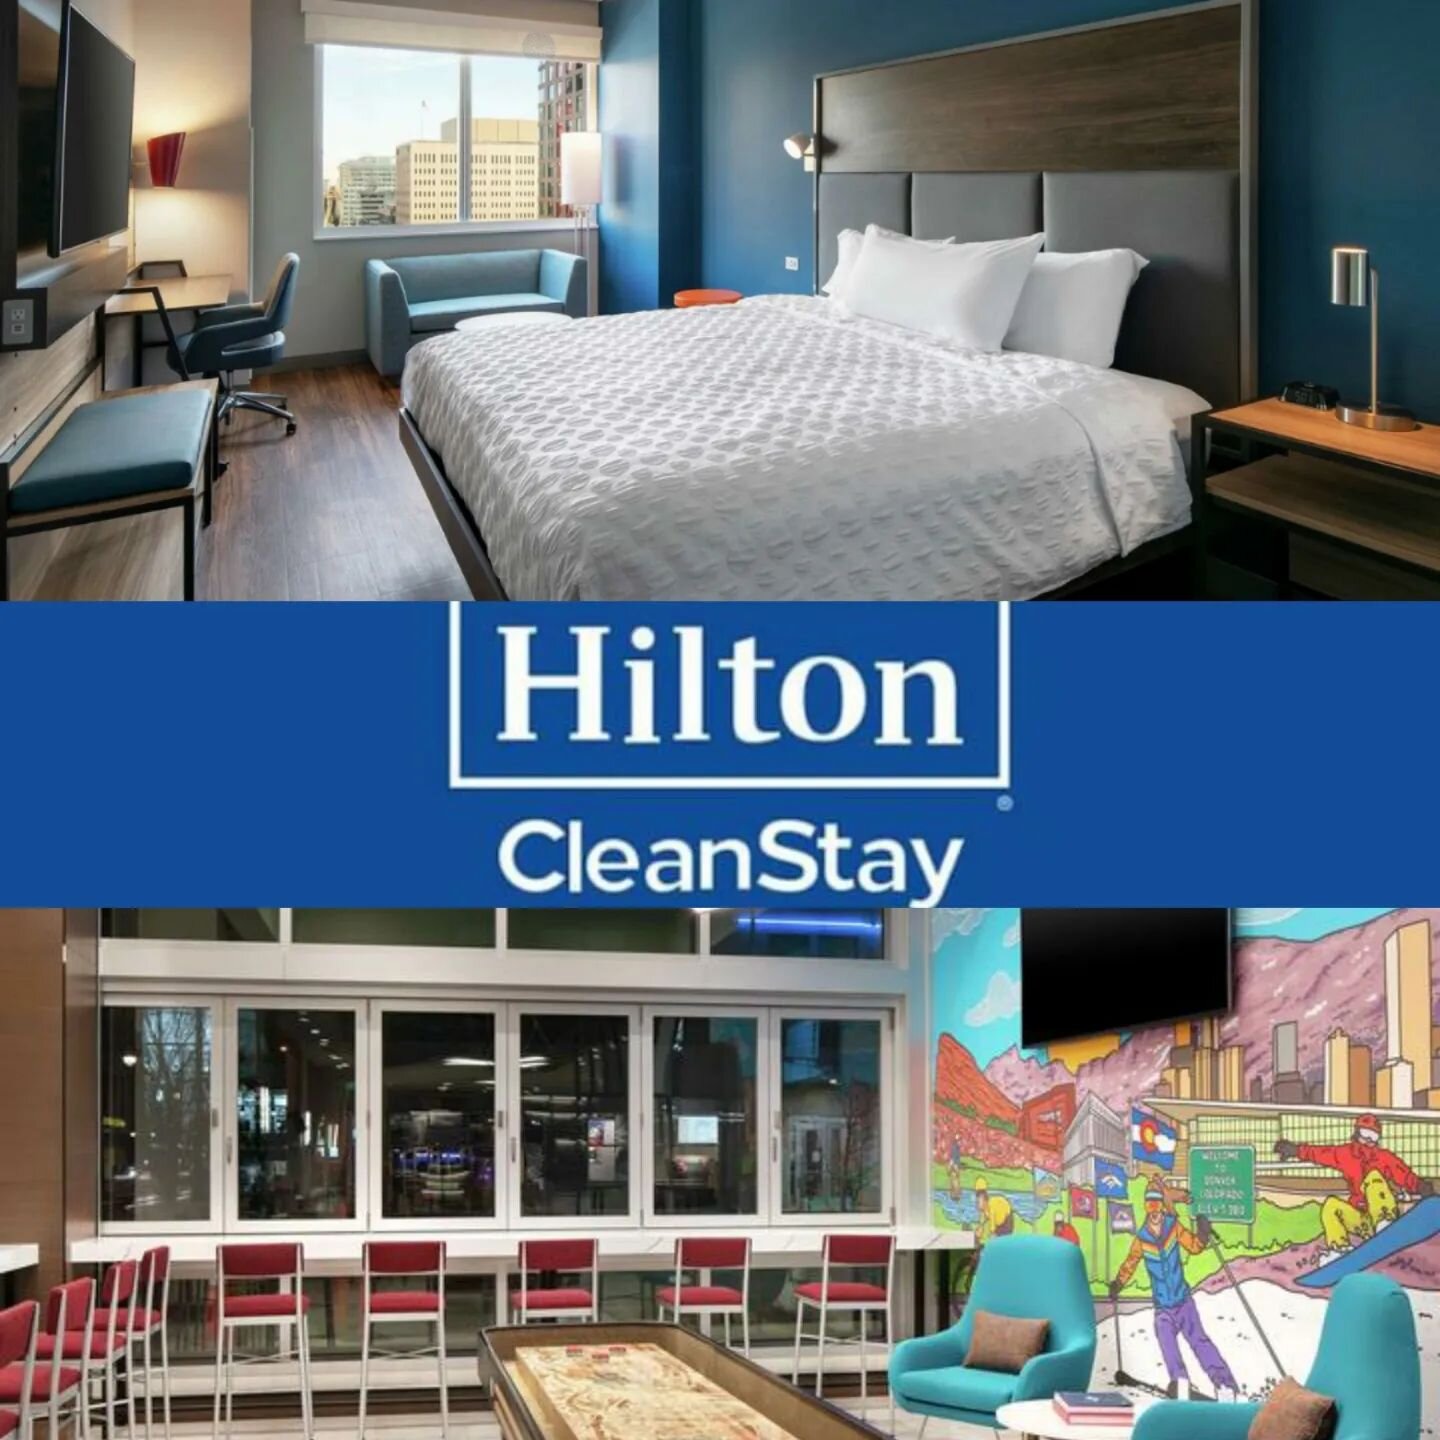 A pleasure working with you on your event!  Thank you for trusting us with your bookings. Hope you enjoyed the accomodations in #Denver ! @seamormarine 

#hilton #trubyhilton #hotel #travel #travelawesome #hotellife #hotels #trubyhiltondenver #colora